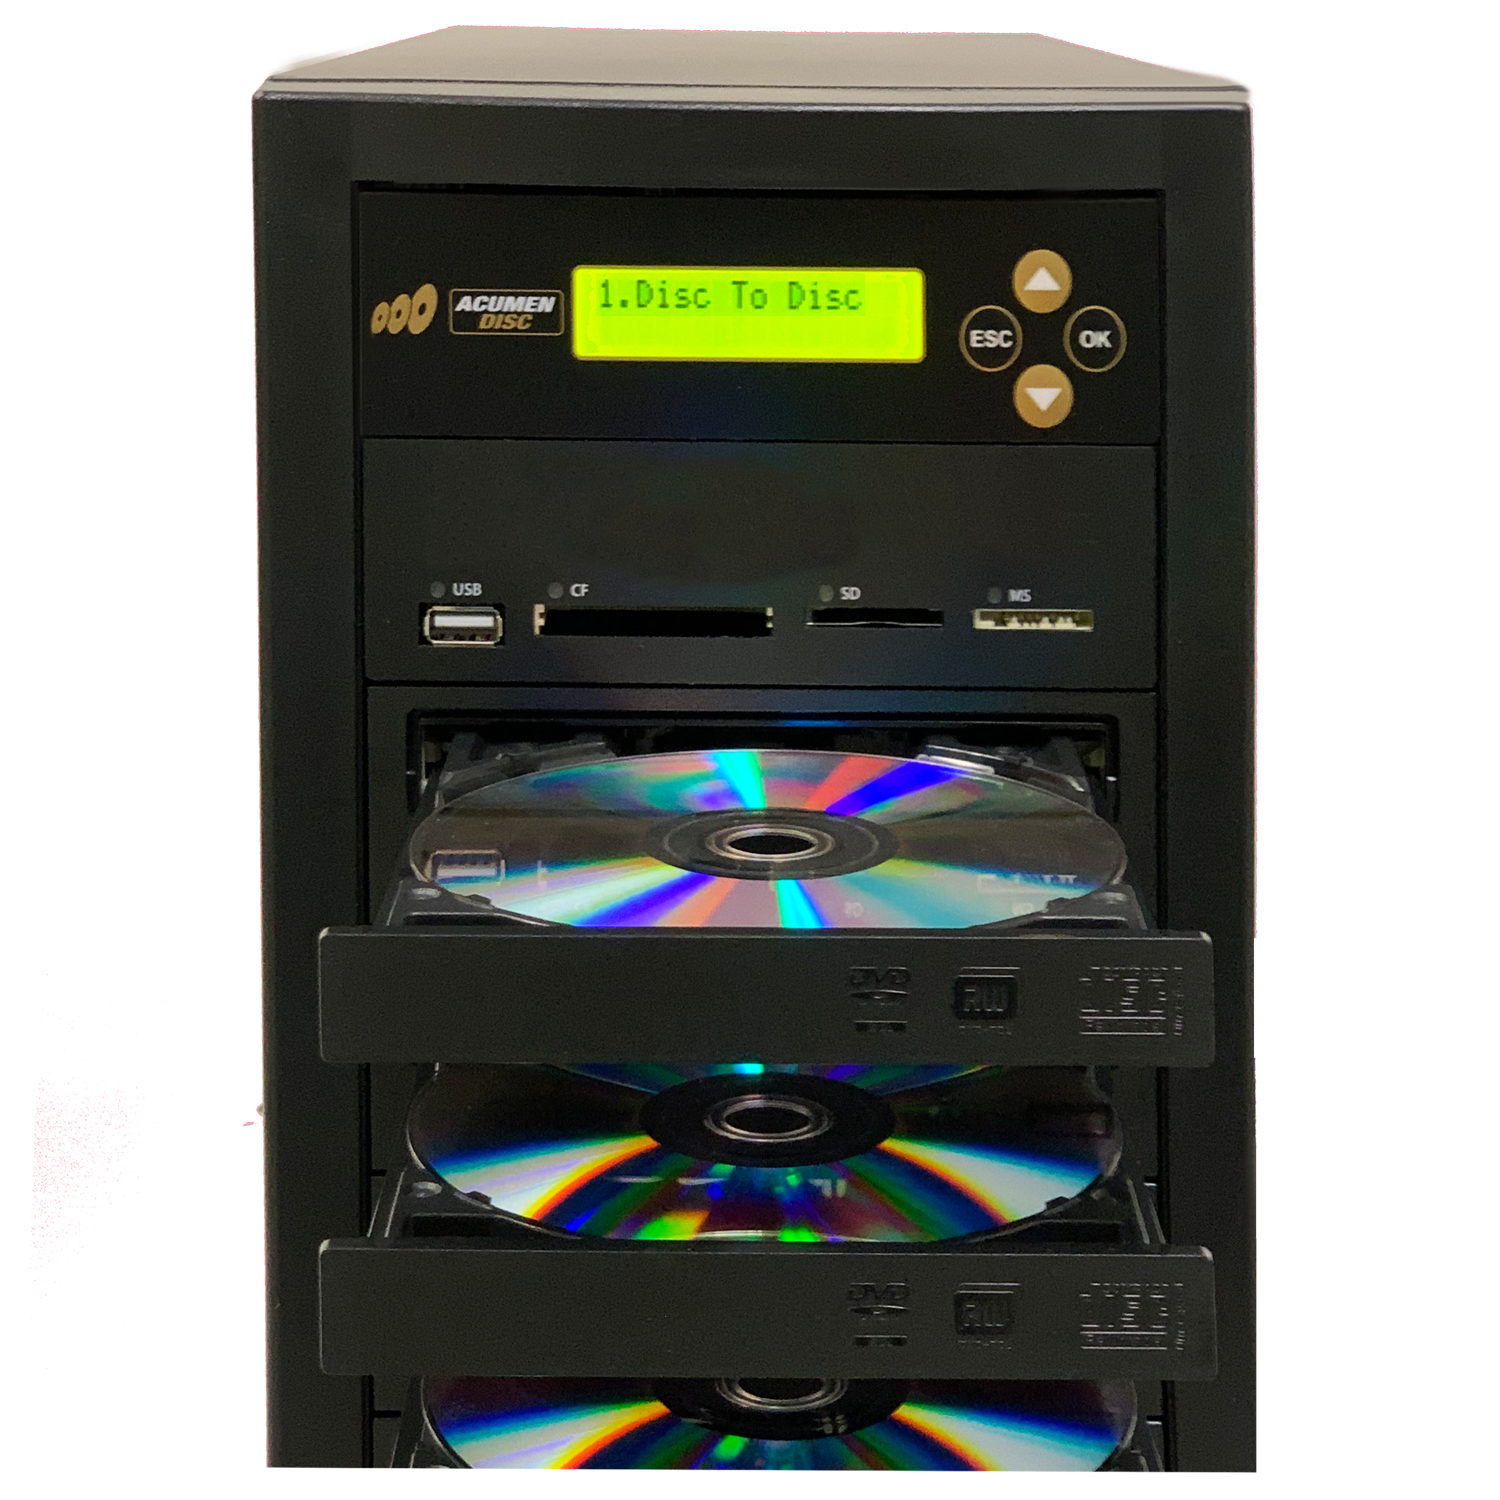 Acumen Disc 1 to 2 Flash Media (CF / SD / USB / MMS) to Multiple (DVD/CD) Discs Copier Duplicator Tower System - image 3 of 7